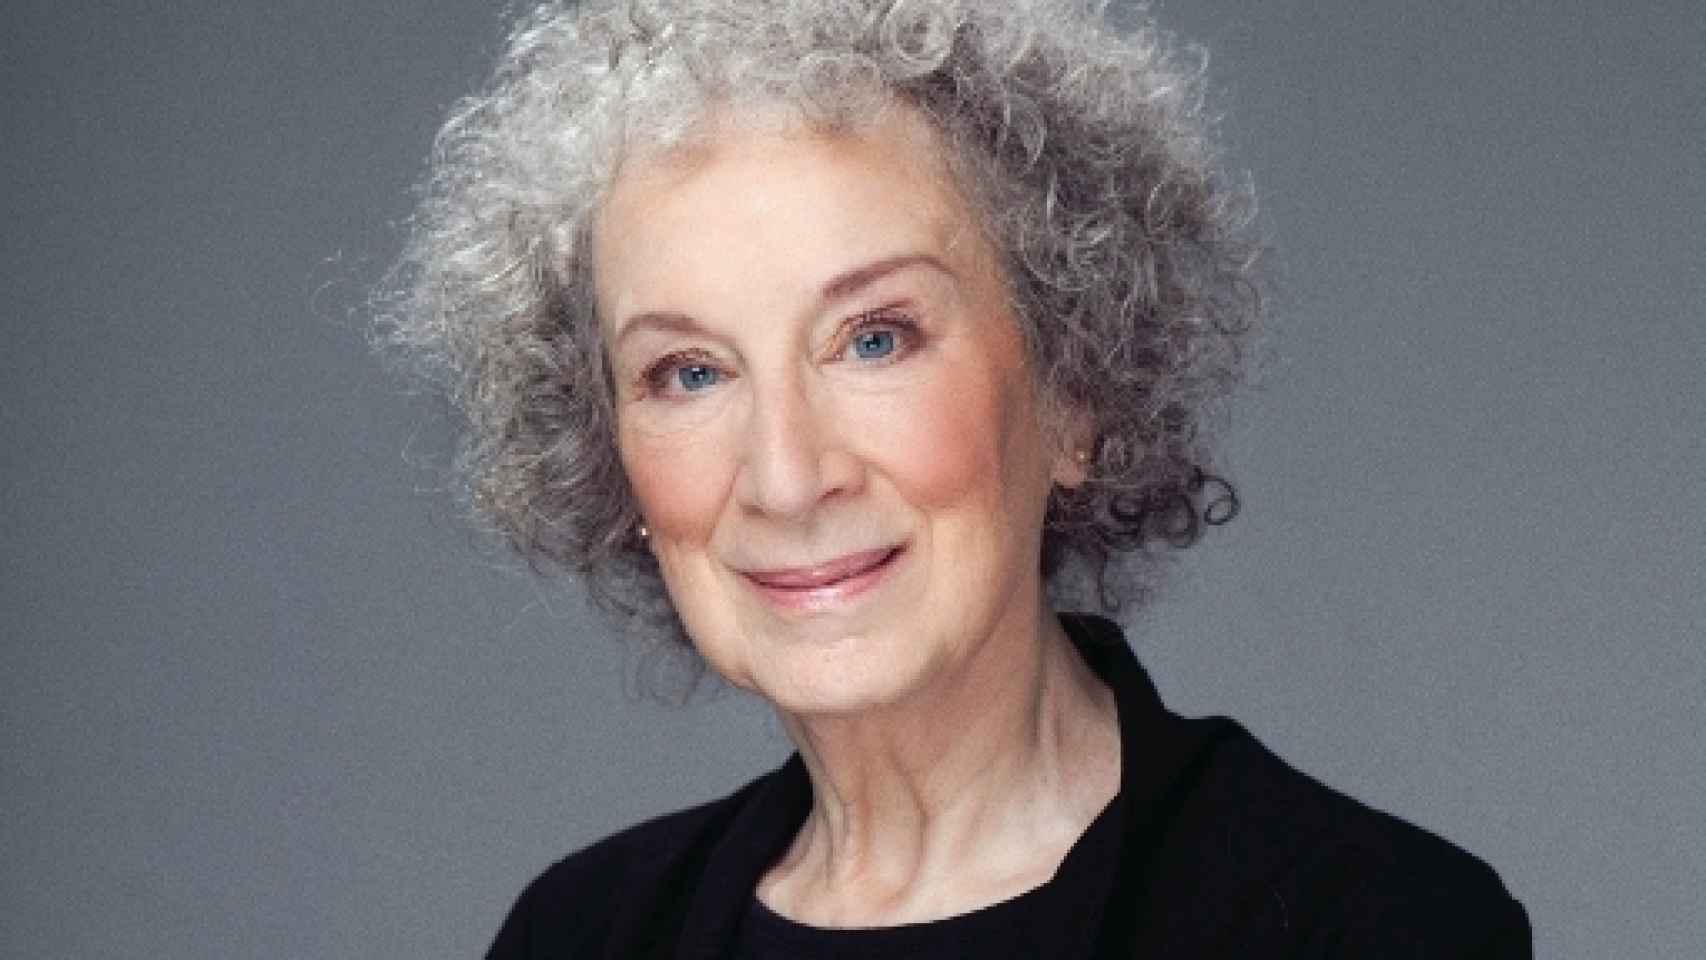 Image: Atwood, cuento inédito